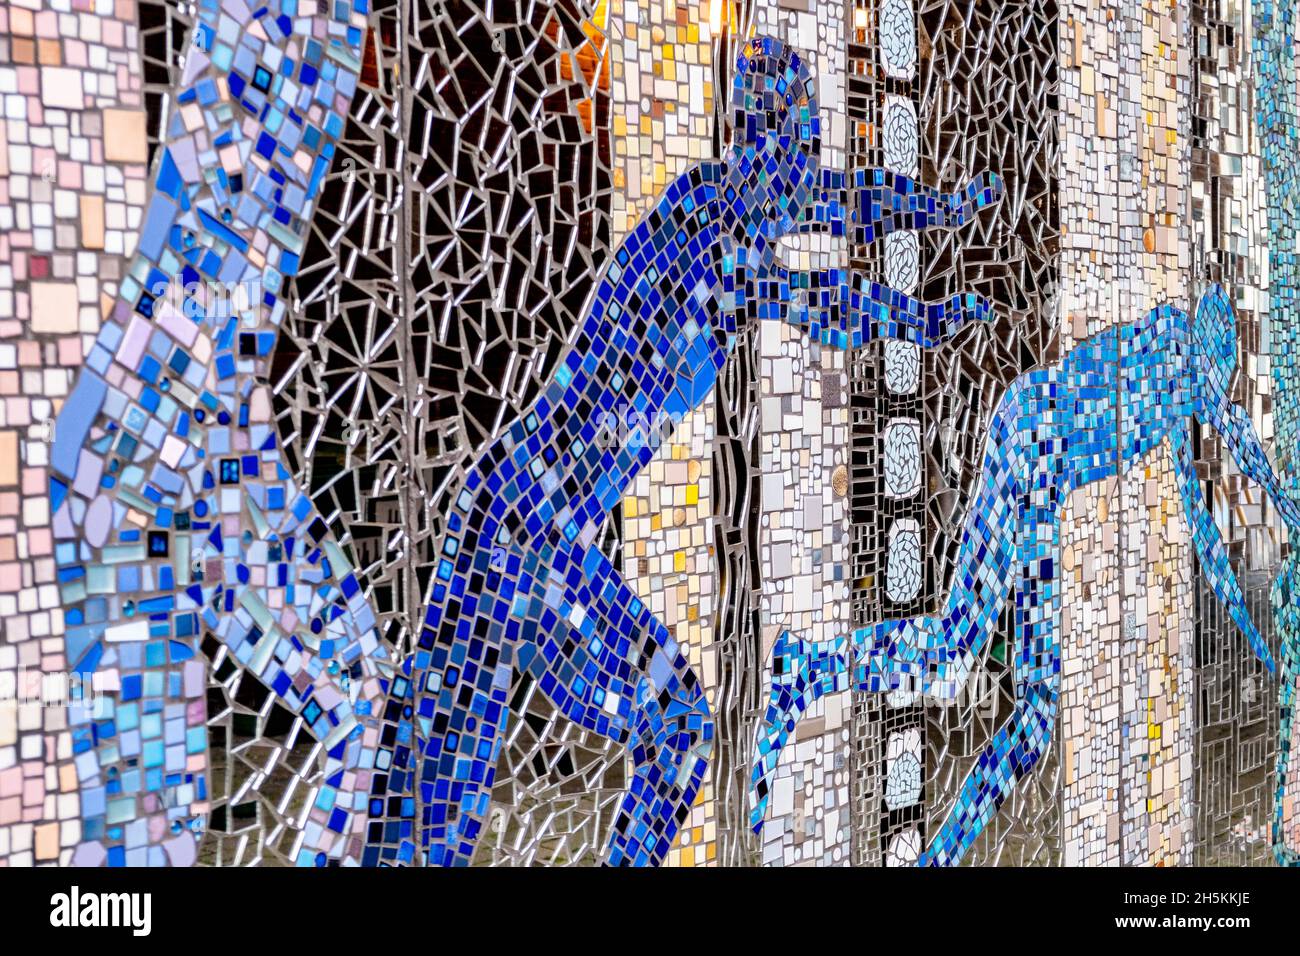 Kingston Upon Thames London England UK November 5 2021, Mosaic Wall Art Of Colourful Figures On A Building Exterior Stock Photo